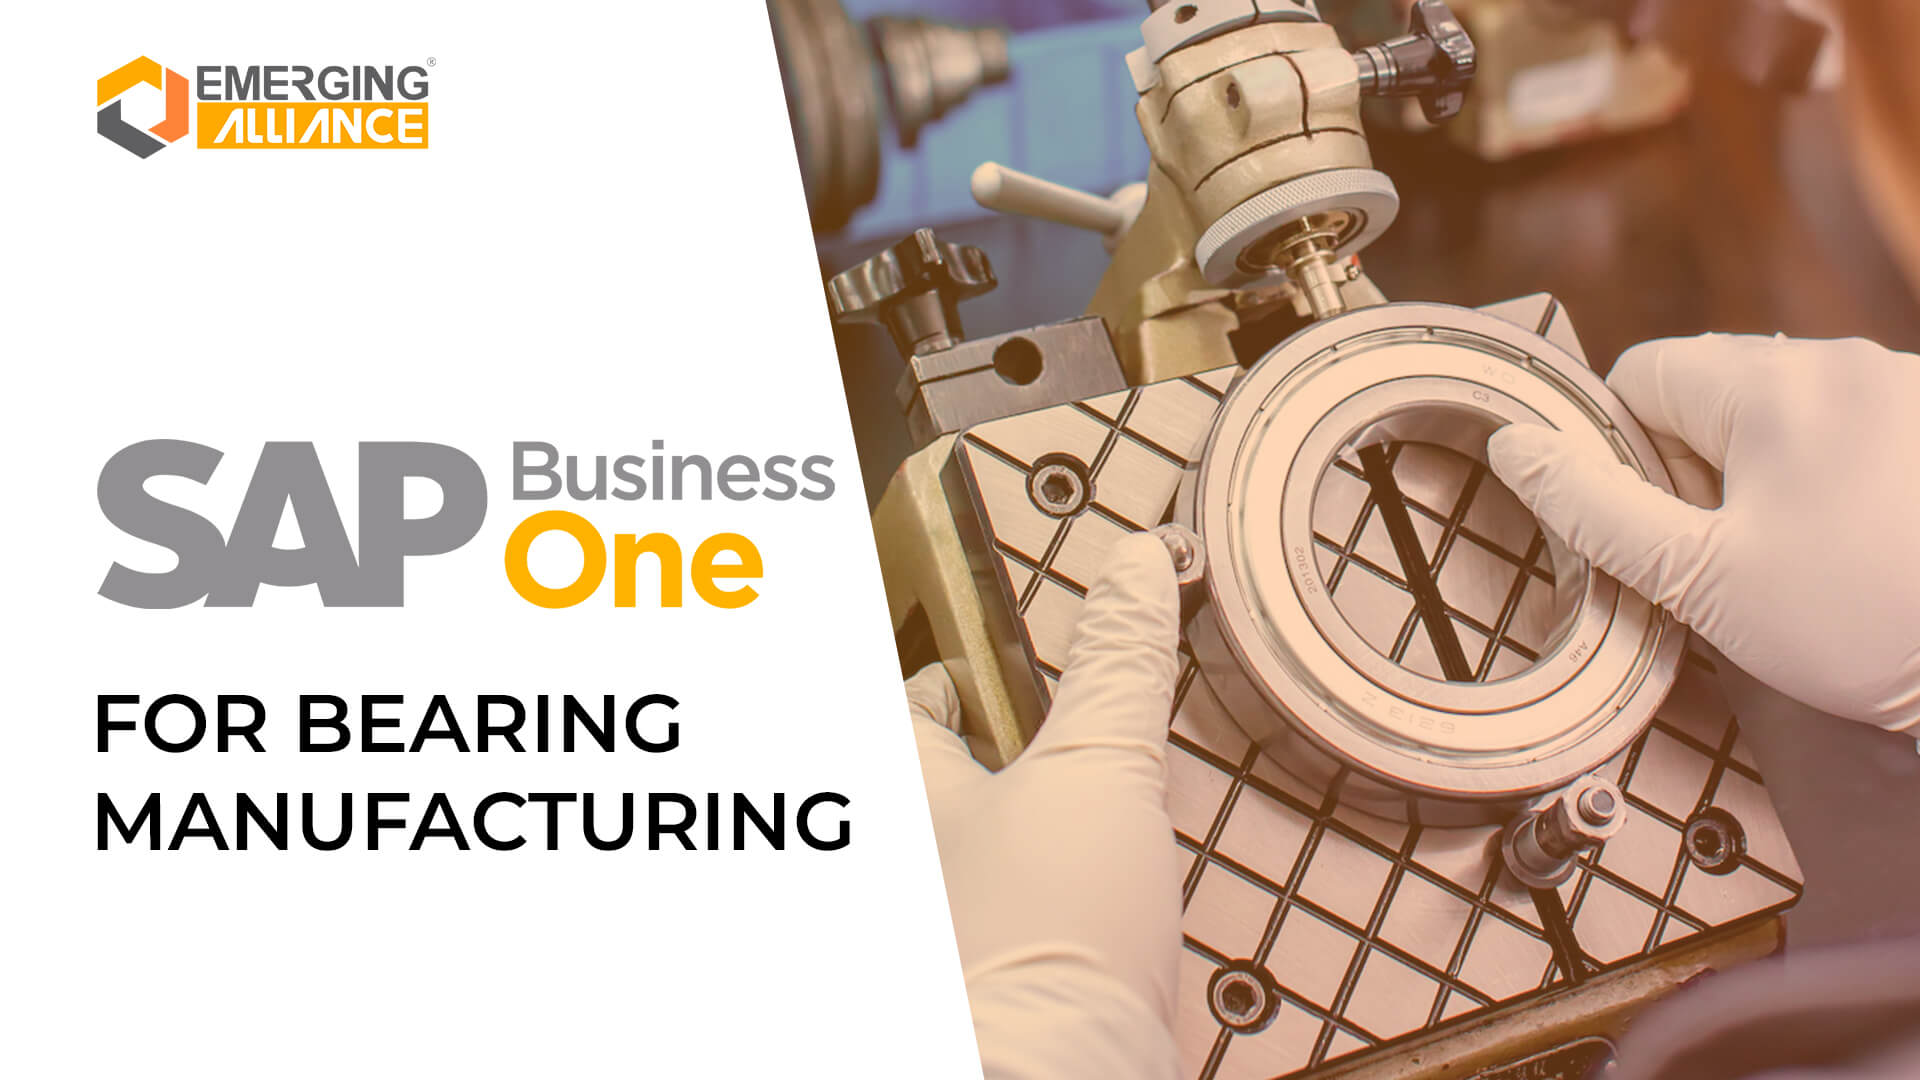 sap business one for bearingmanufacturing